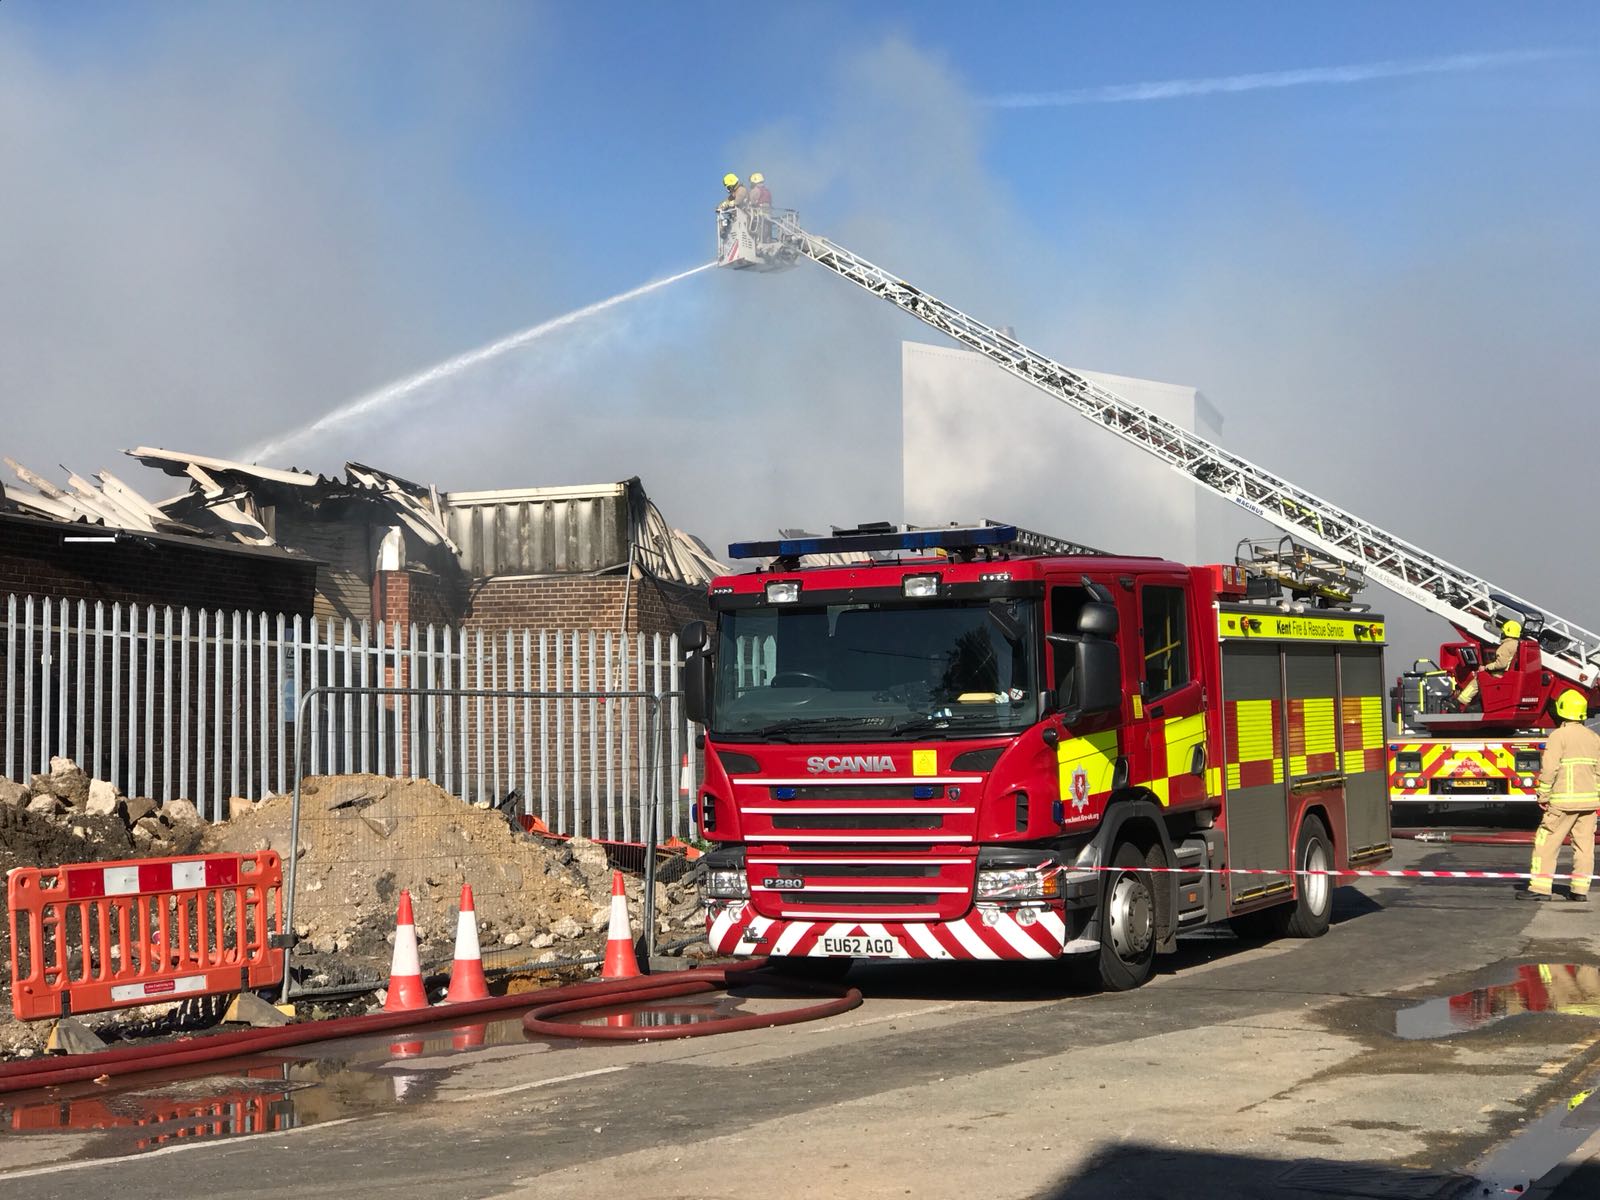 kent-fire-and-rescue-service-on-twitter-latest-update-on-dartford-fire-crews-expected-to